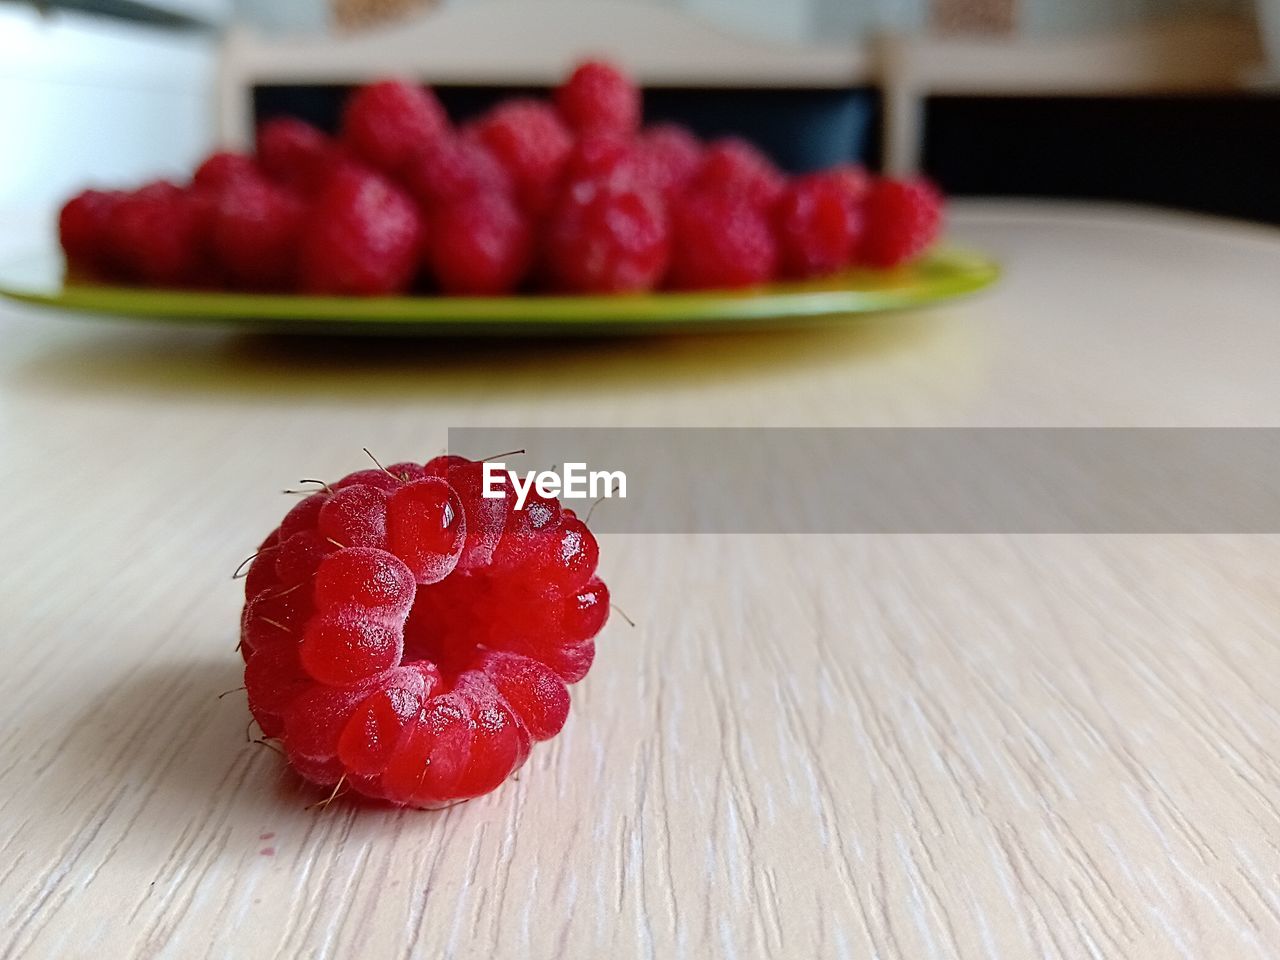 CLOSE-UP OF STRAWBERRY FRUIT ON TABLE